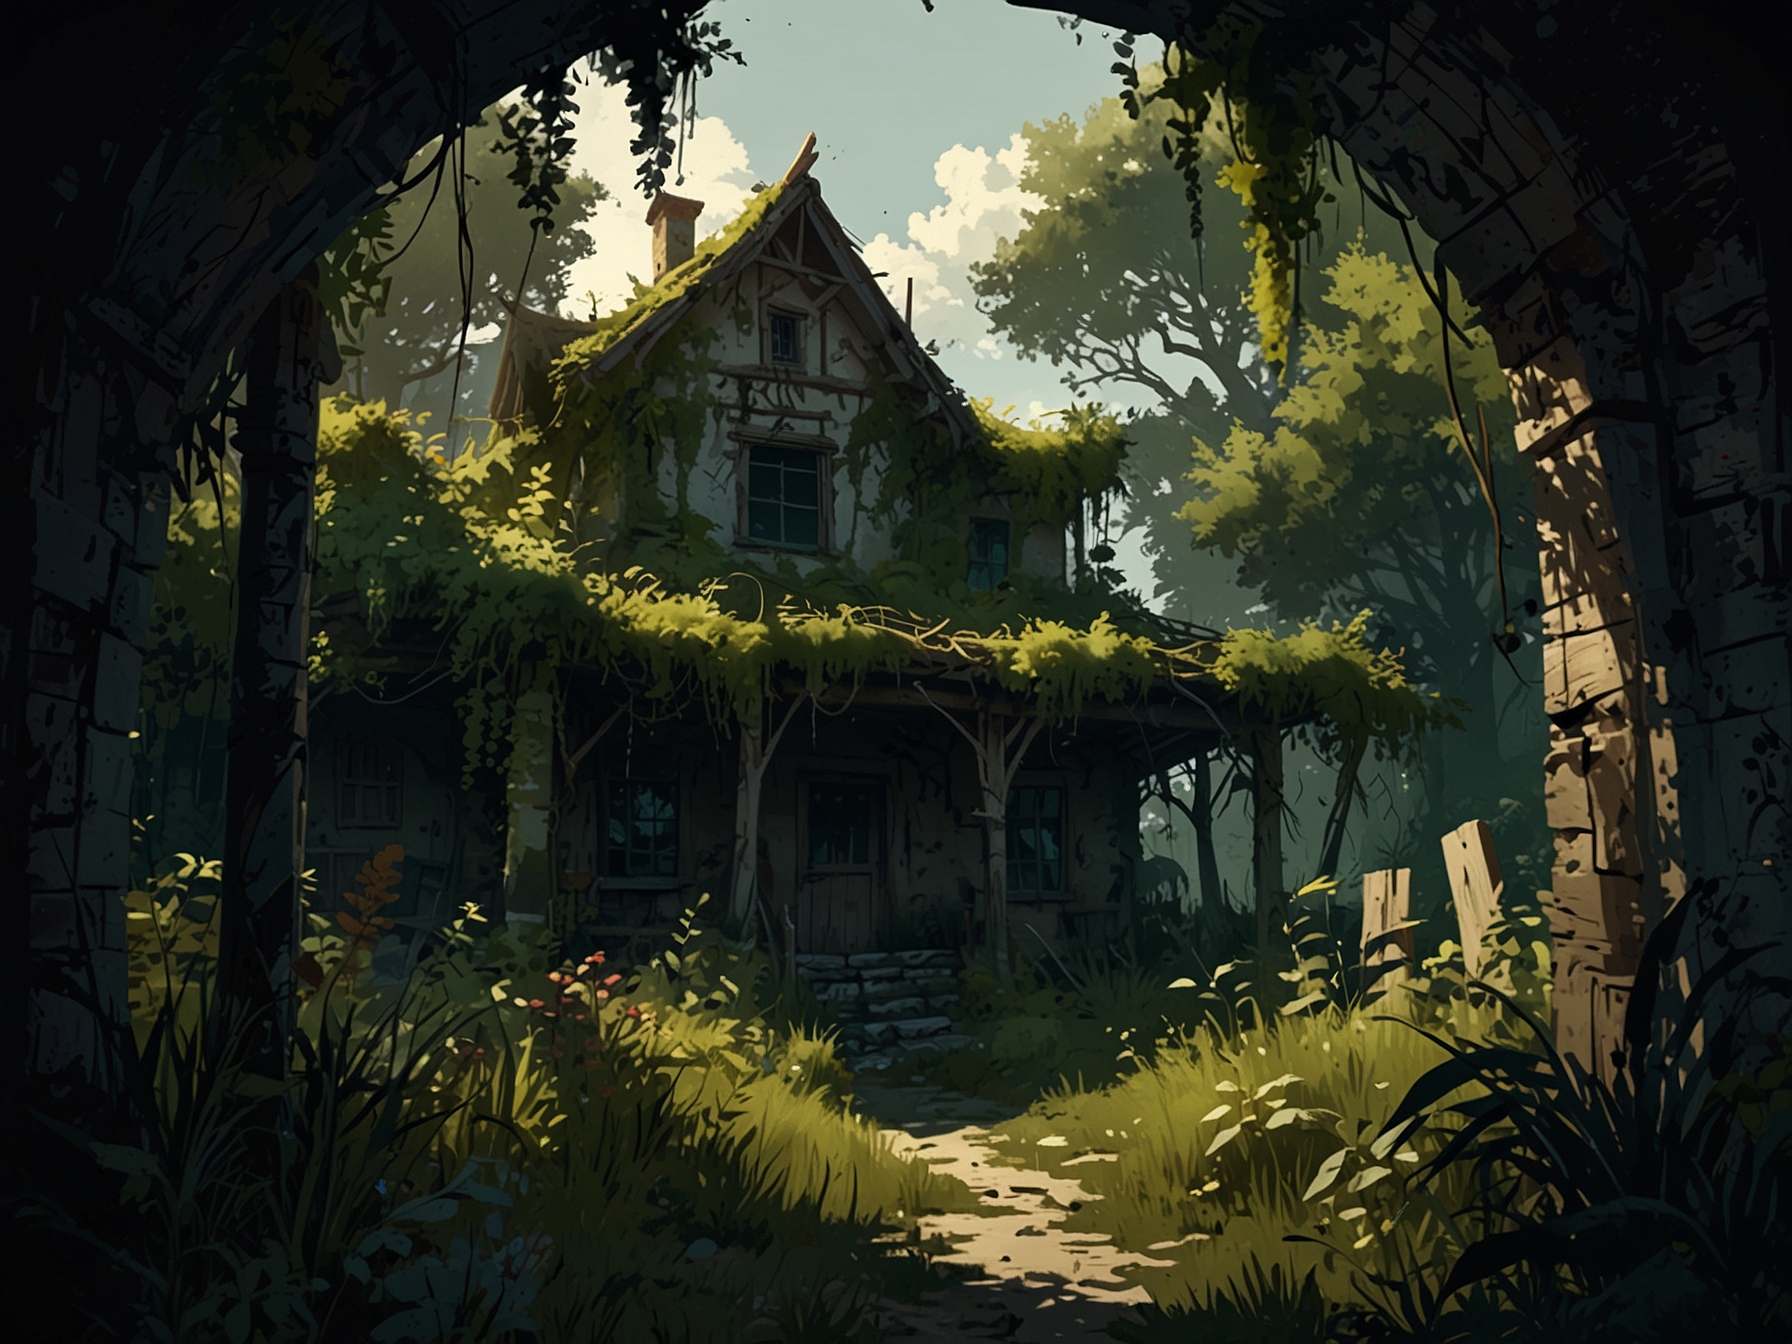 A detailed image of an overgrown rural landscape with dilapidated structures and a character cautiously moving through shadows, illustrating the game's meticulous world-building.